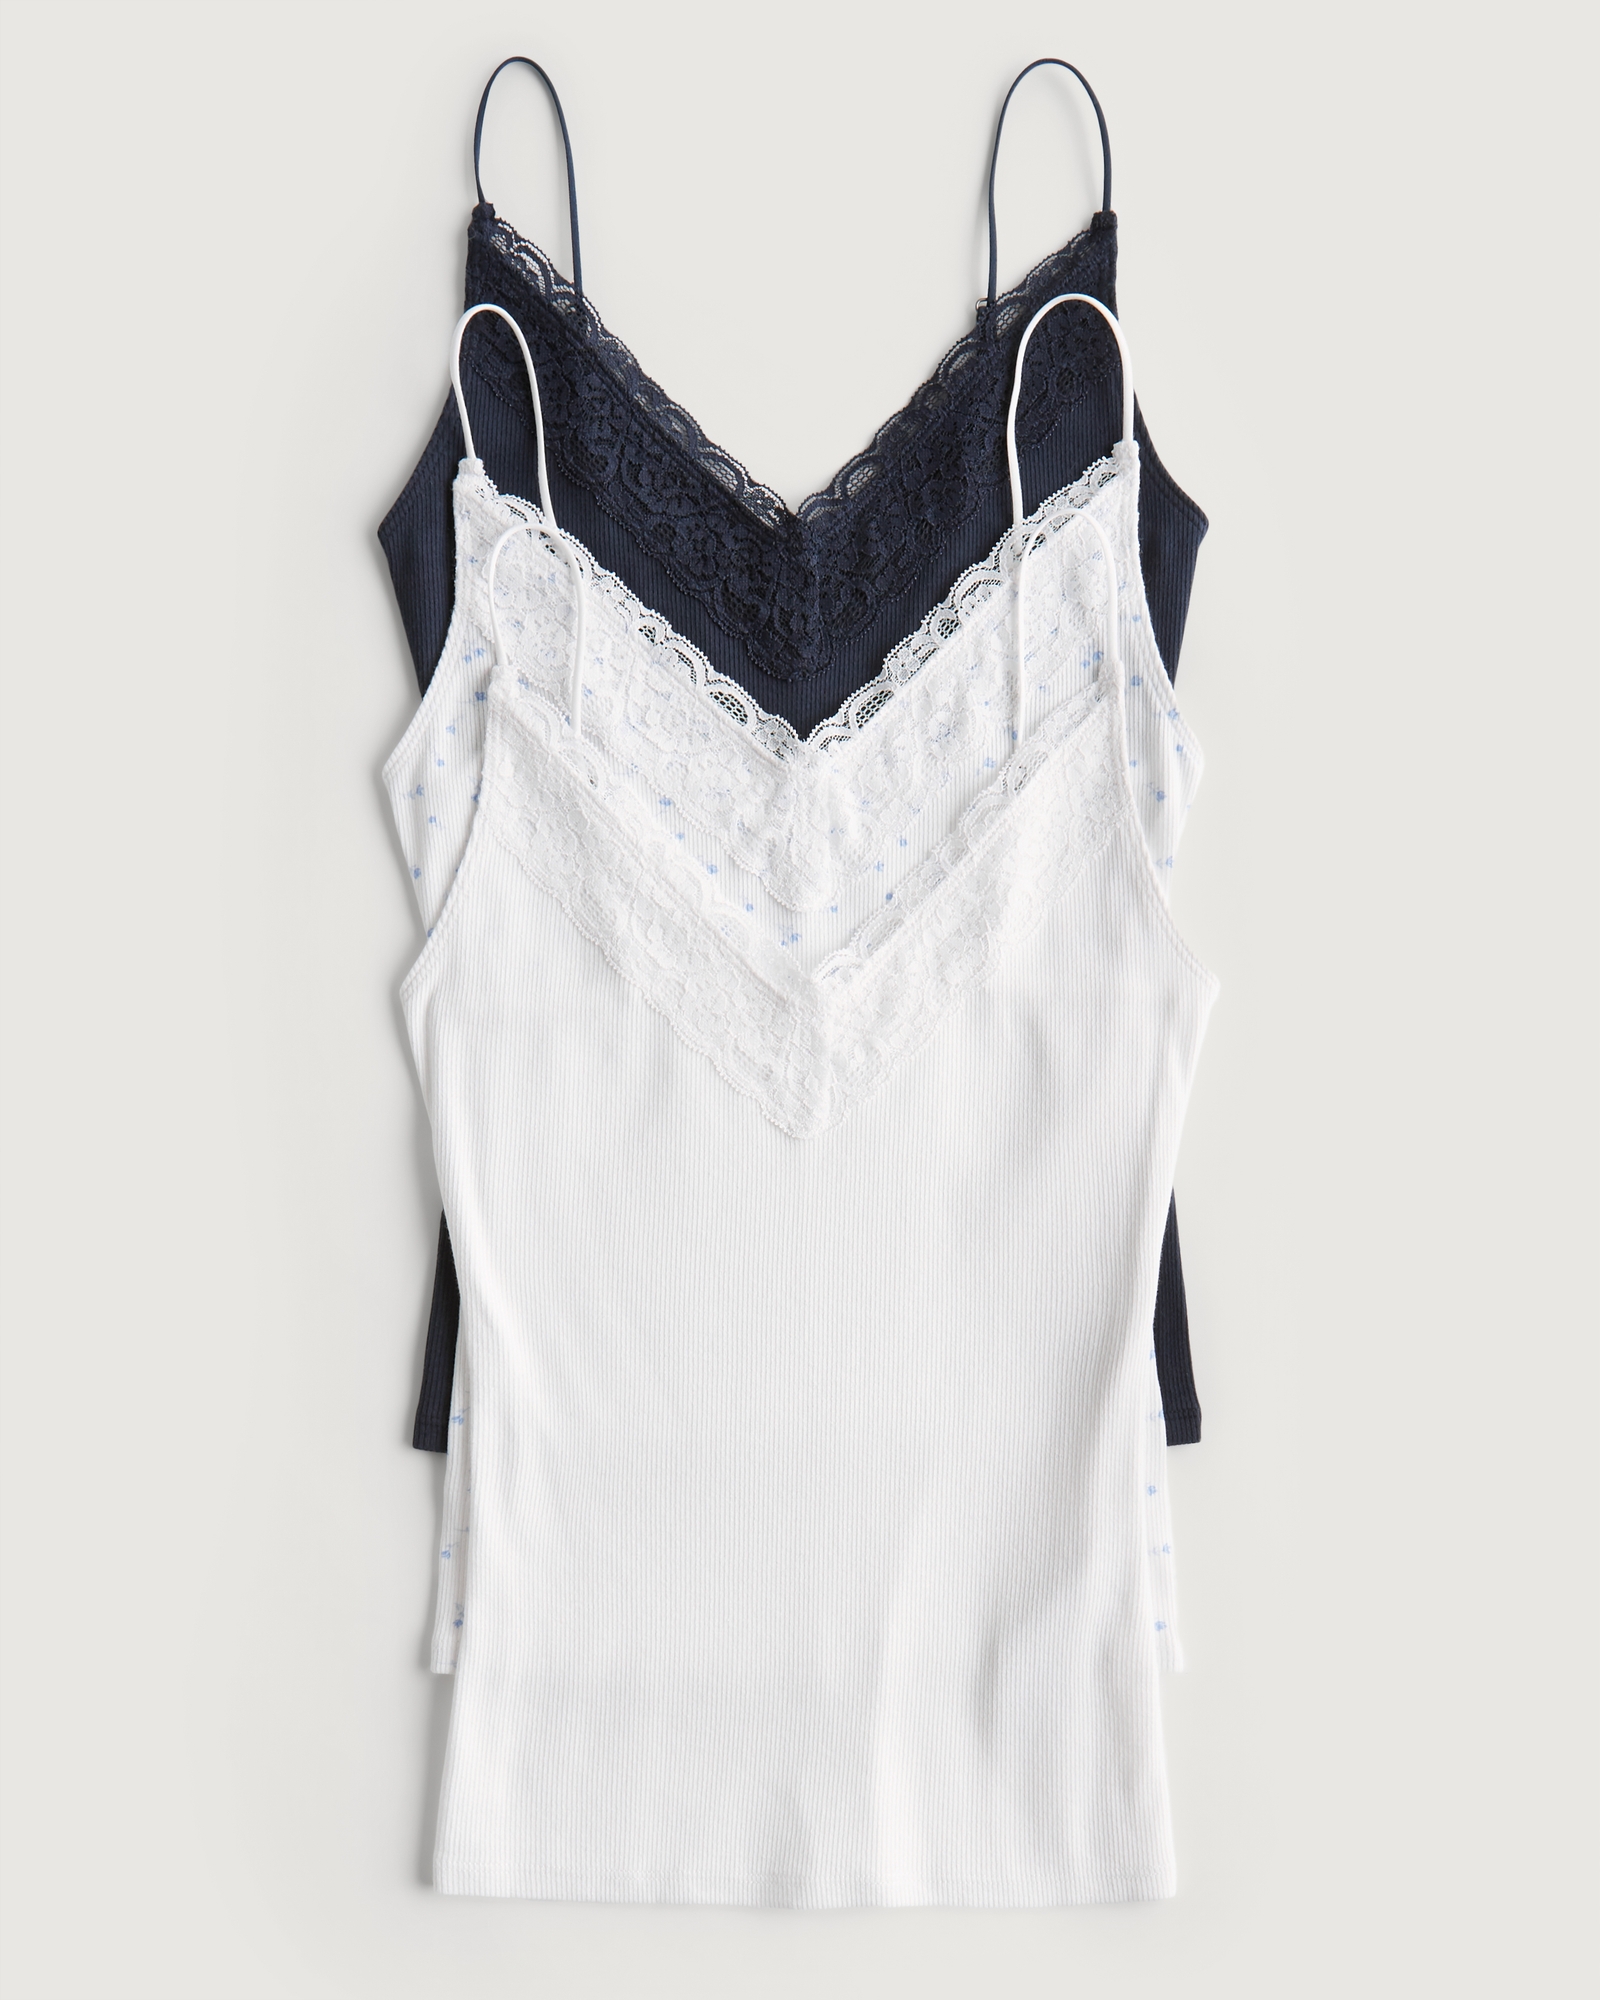 Camisole Tops, Camis, Cami Tops